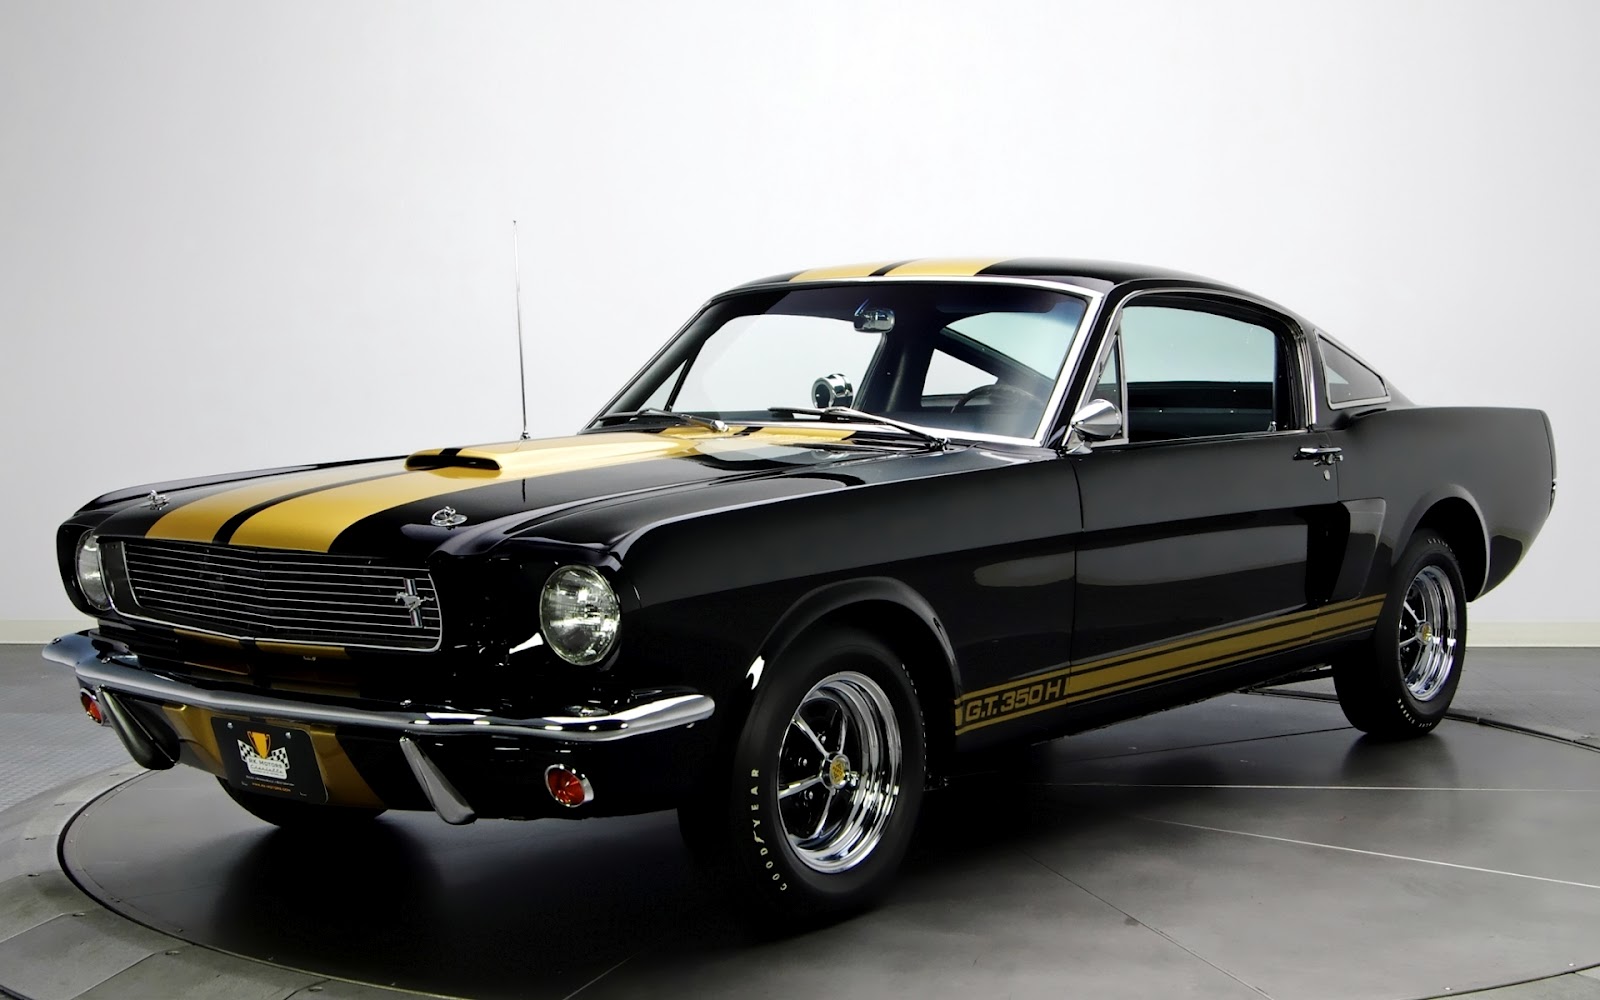 Good Vibrations comes with this 1966 Ford Mustang GT350H at vinyl record memories.com